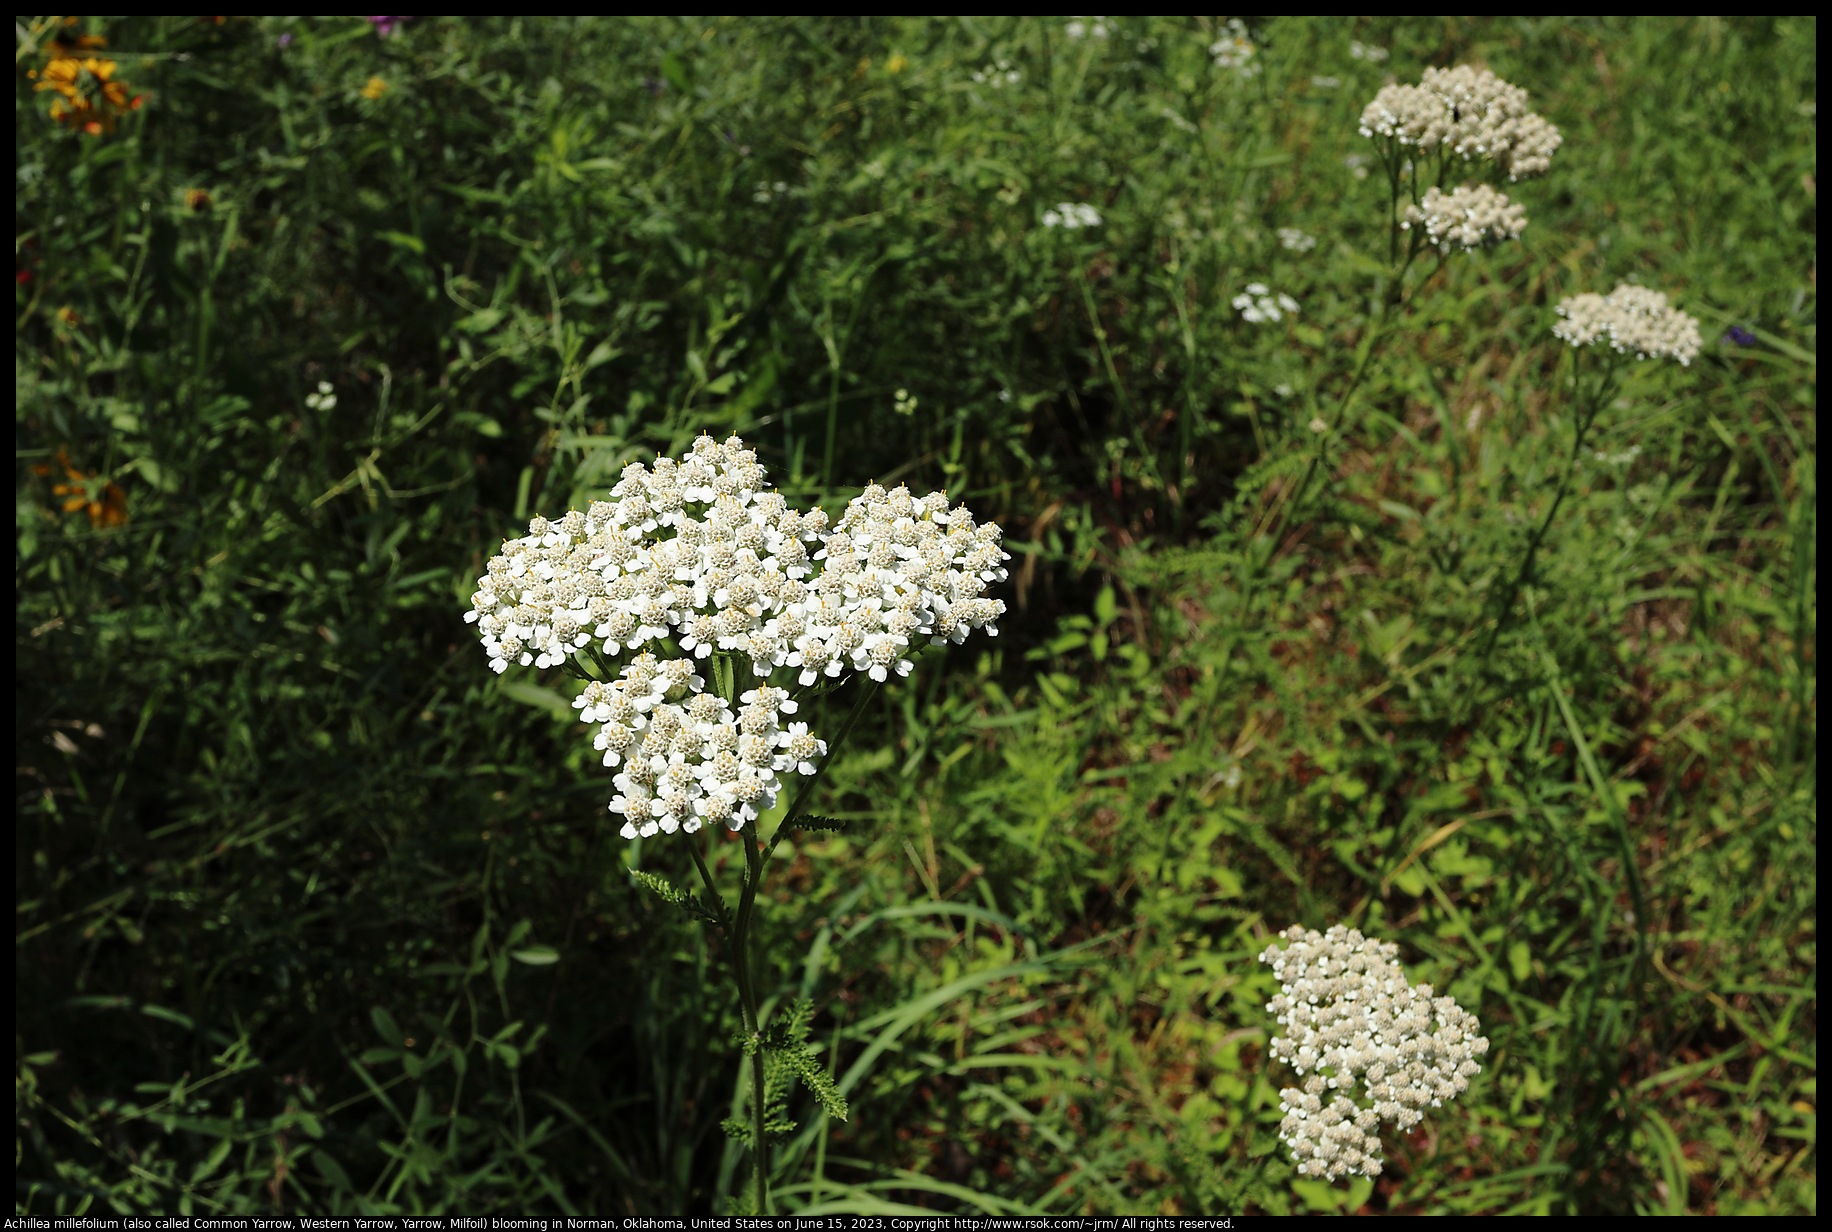 Achillea millefolium (also called Common Yarrow, Western Yarrow, Yarrow, Milfoil) blooming in Norman, Oklahoma, United States on June 15, 2023